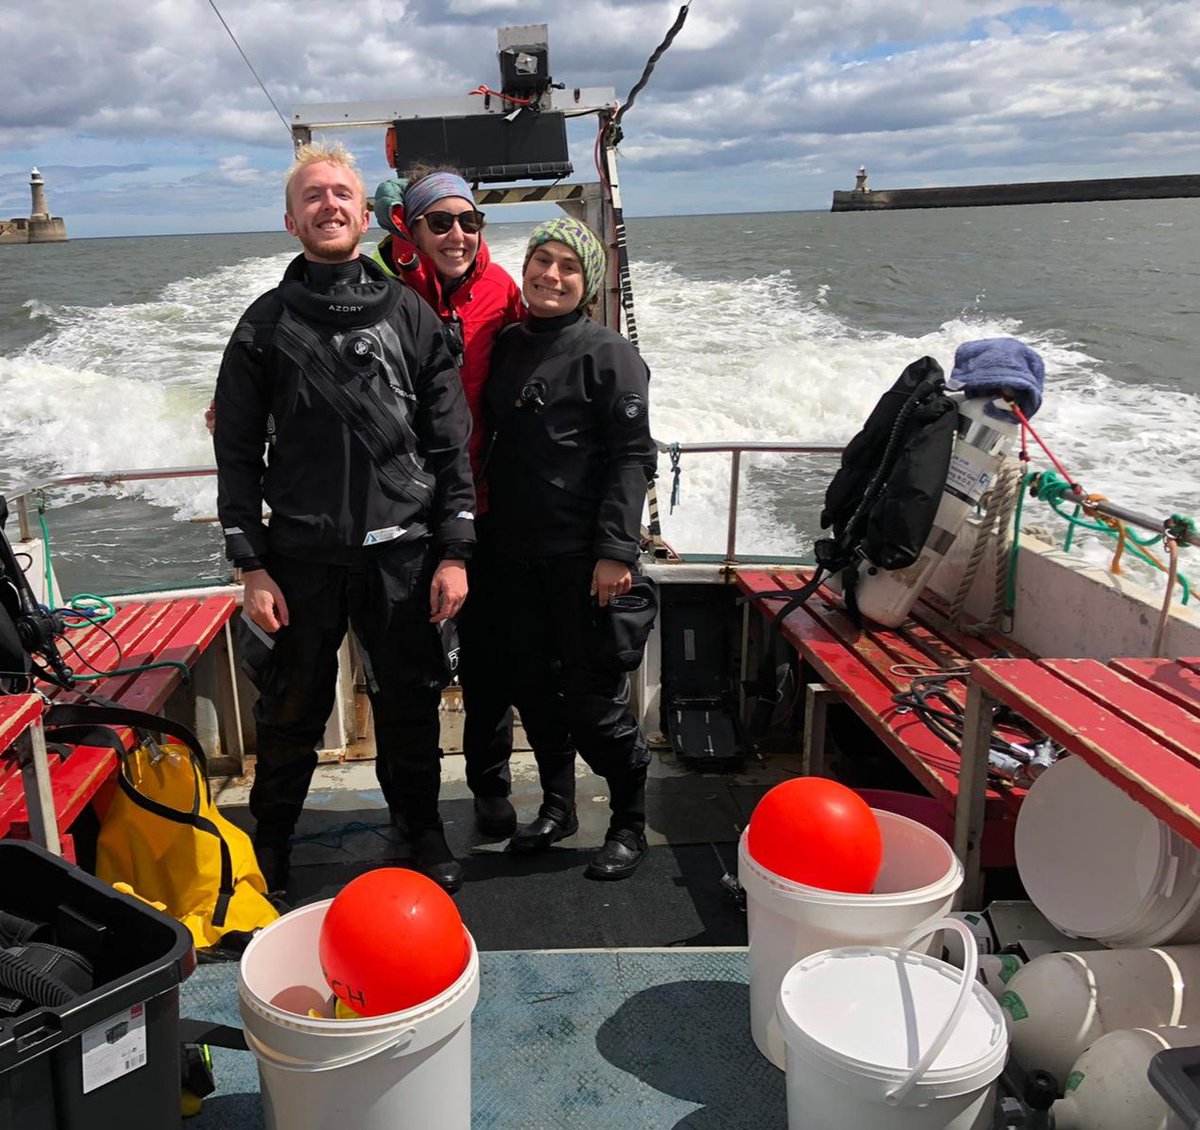 First day of PhD data collection on North East shipwrecks complete! Do wrecks form a resilient ecological network for marine life in the North Sea? Stay tuned to find out @PriestRJ @hannahsearp @clare_fitz @NCLDoveMarine